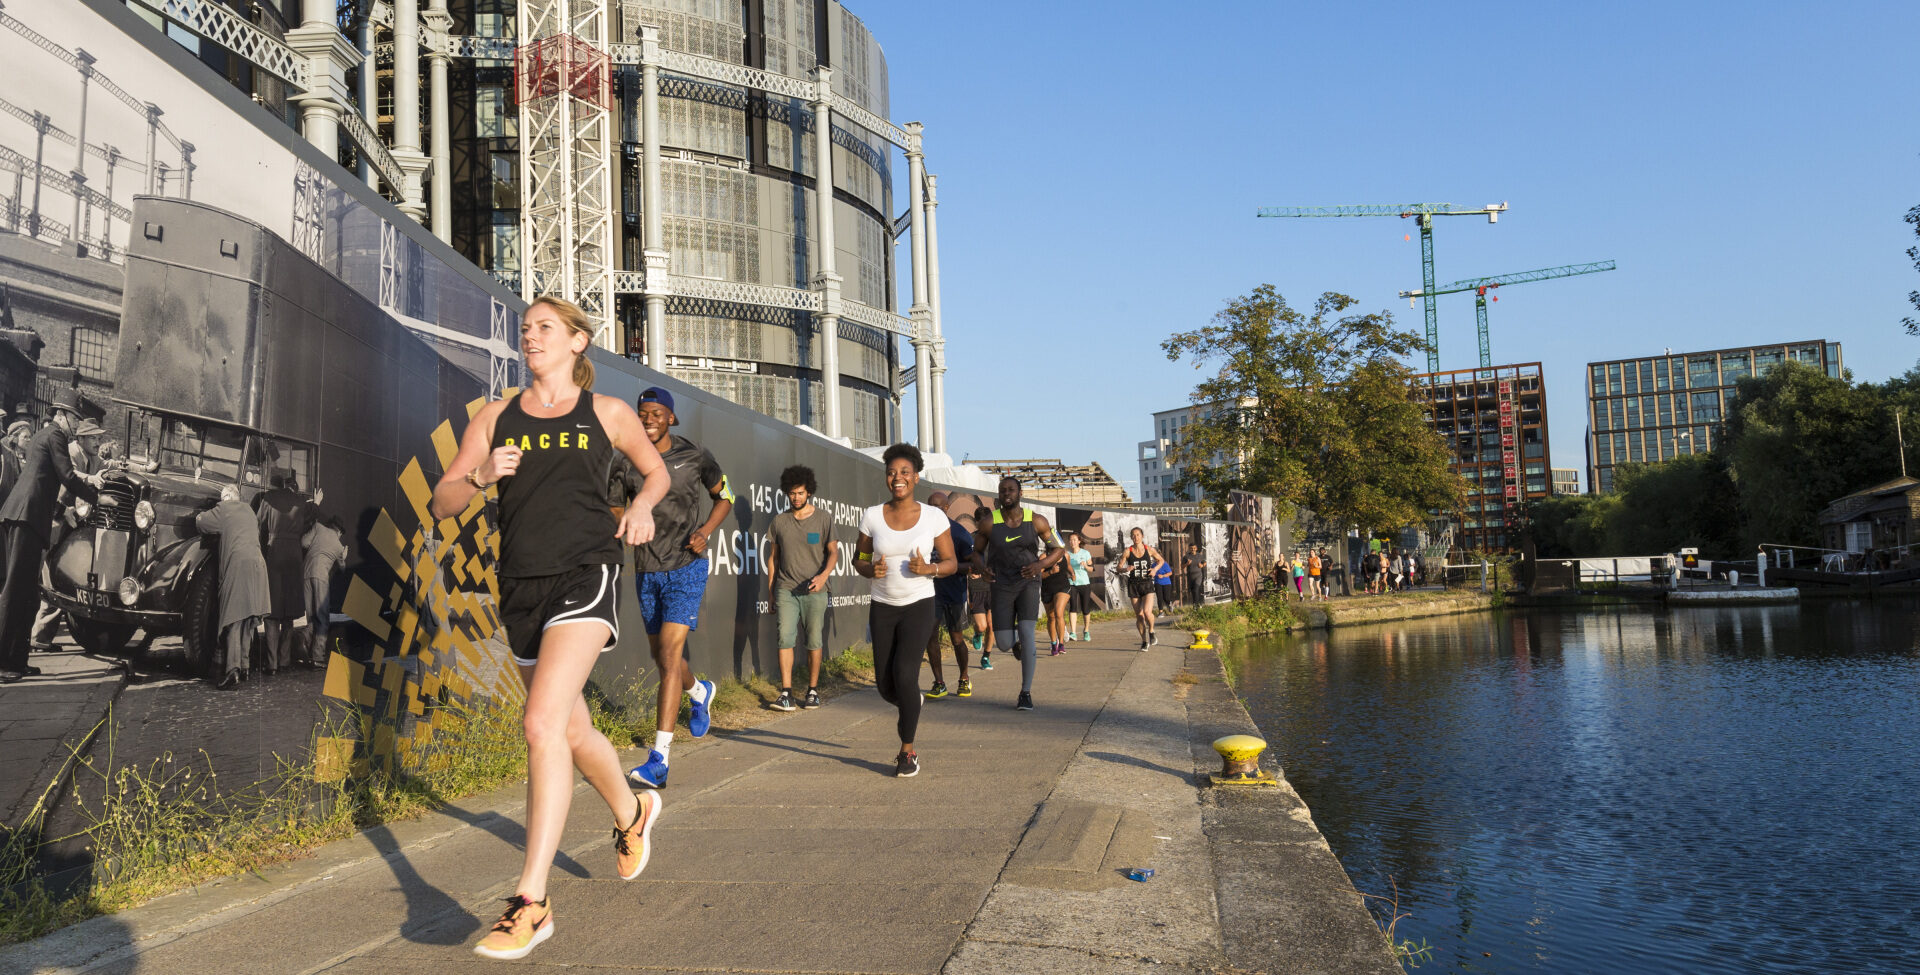 runners on the canal tow path, past Gasholders at King's Cross